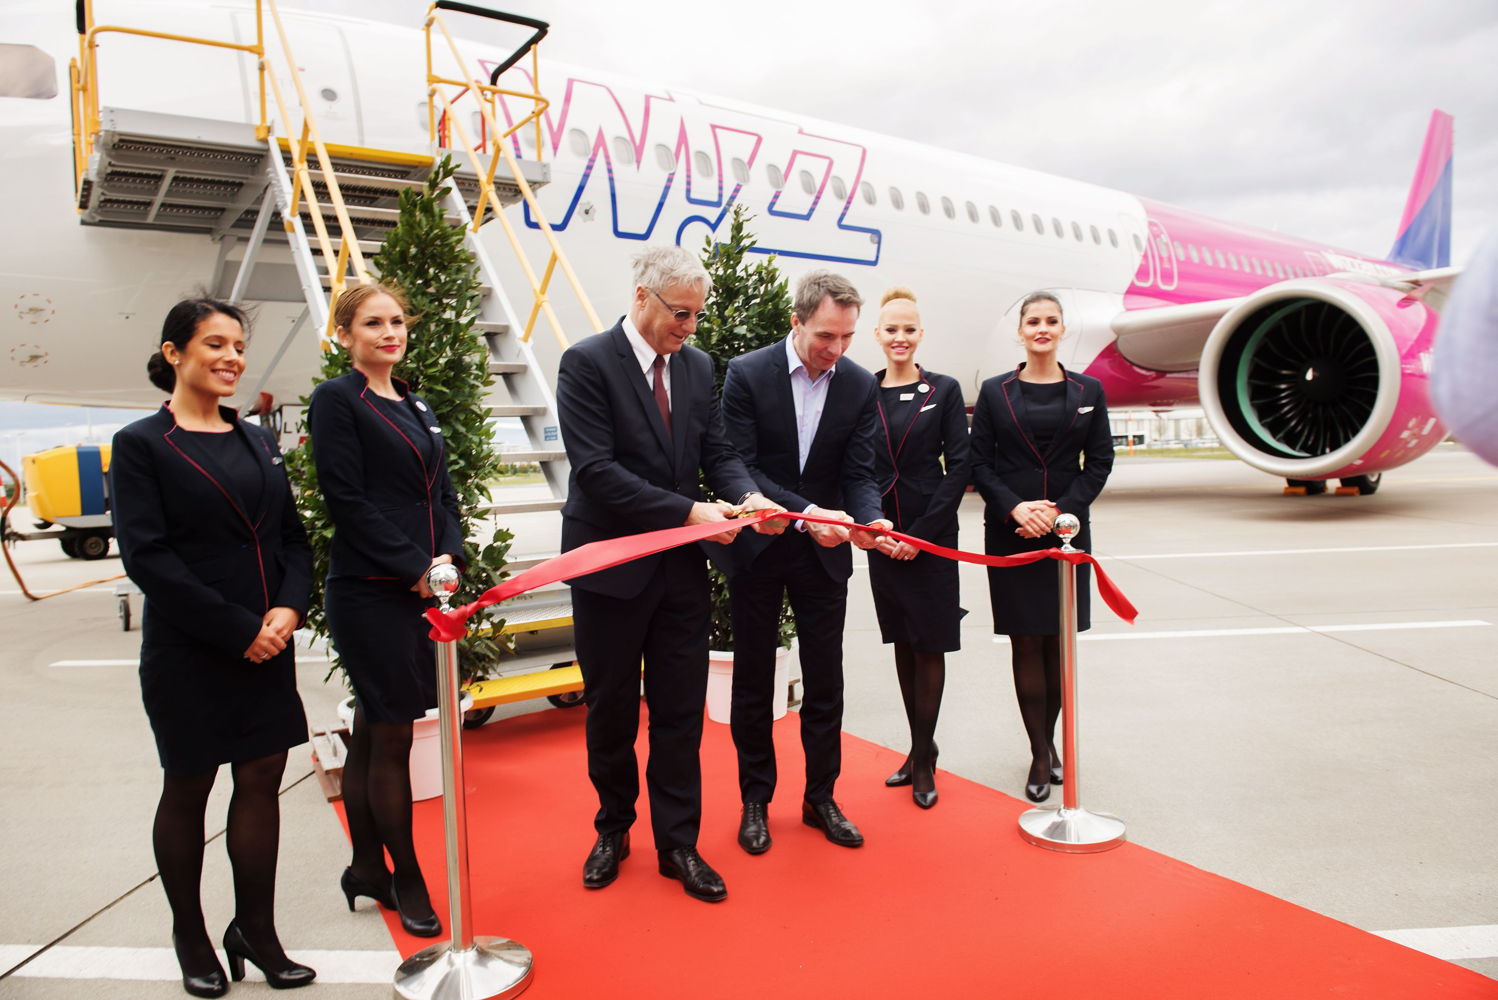 Christian Scherer, Chief Commercial Officer Airbus, & József Váradi, CEO Wizz Air